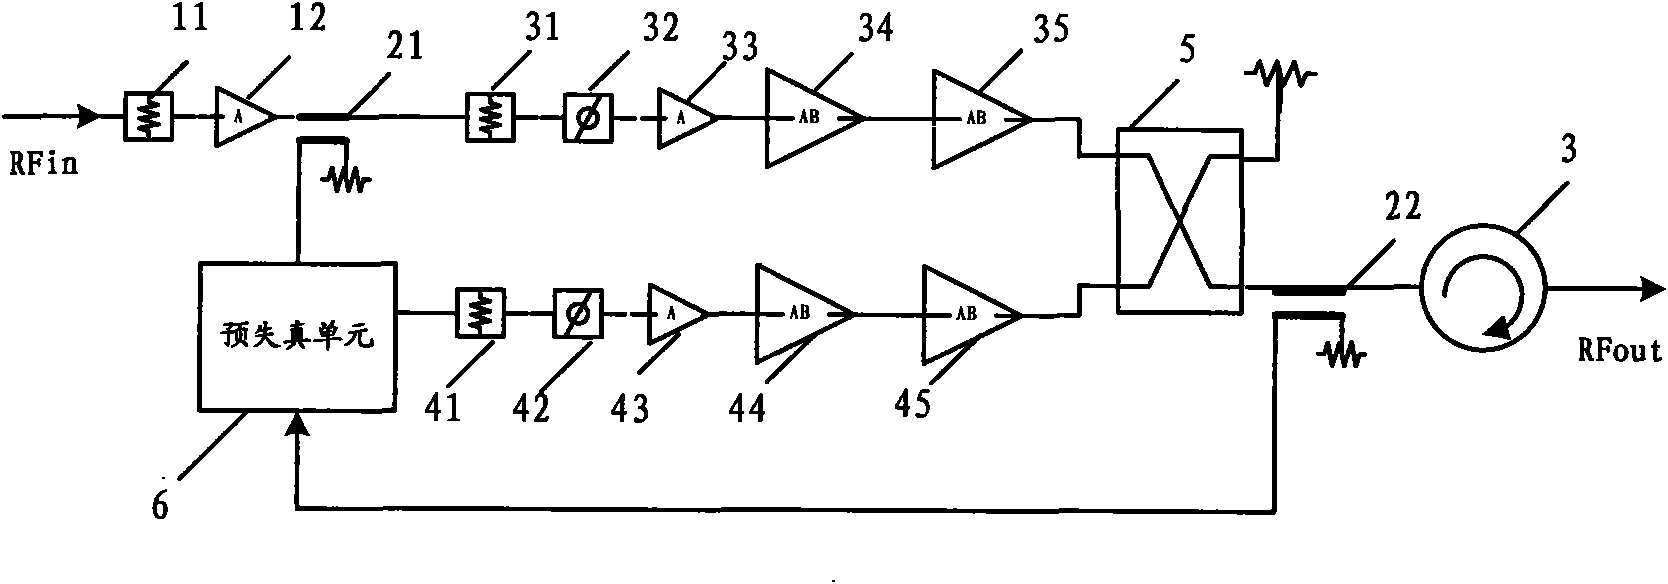 Method for generating pre-distorted signals